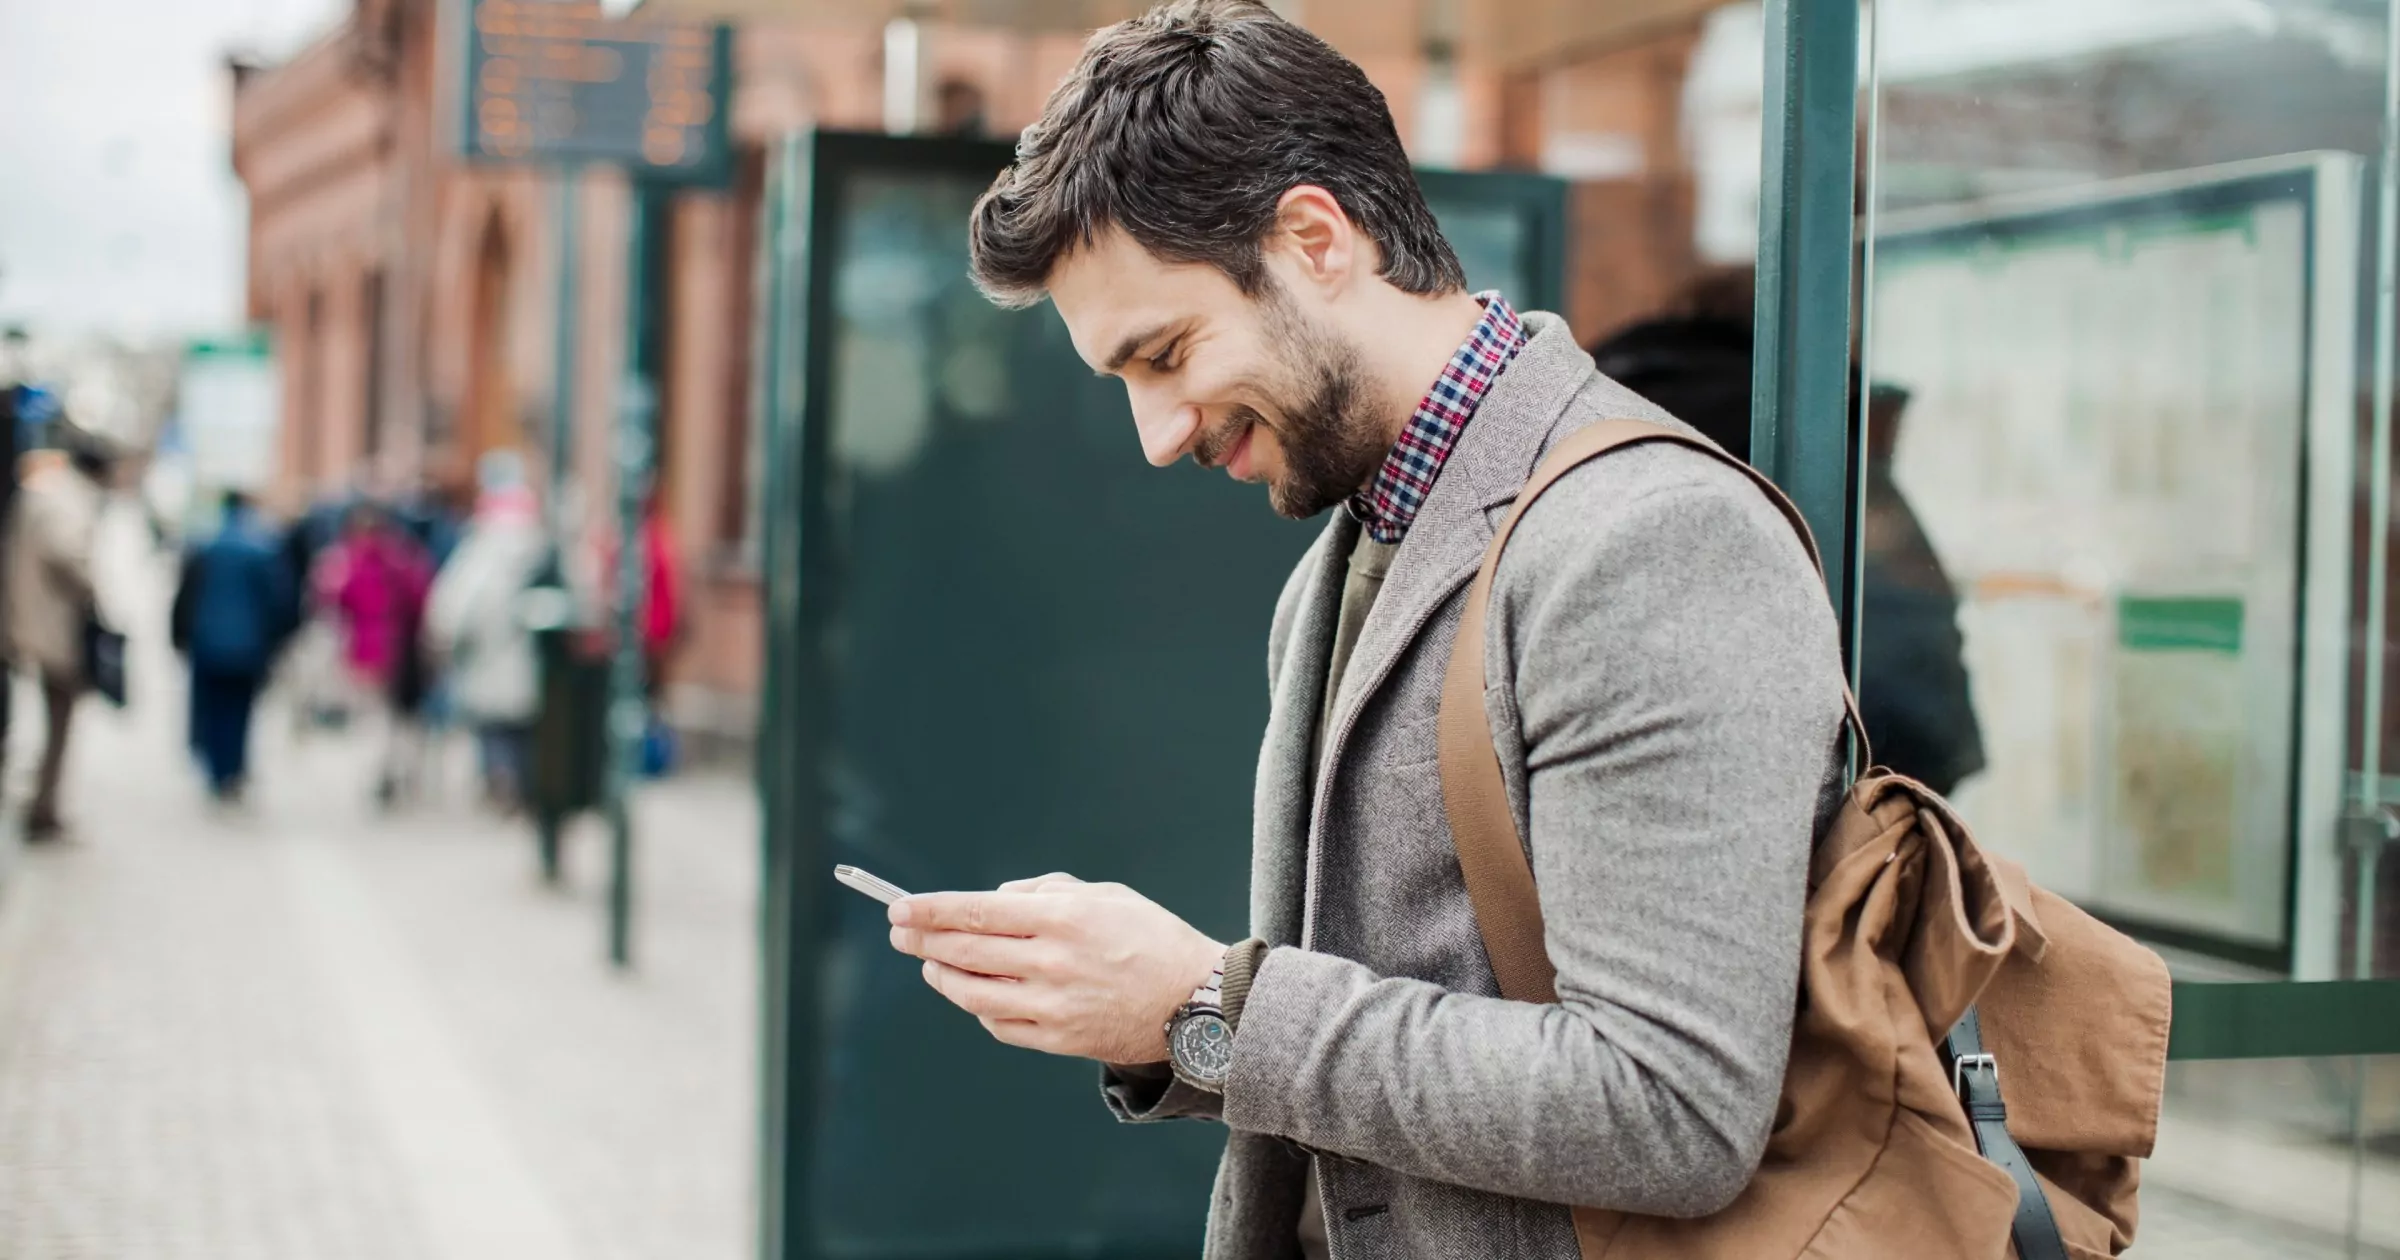 Man smiling at iphone in his hand while on sidewalk